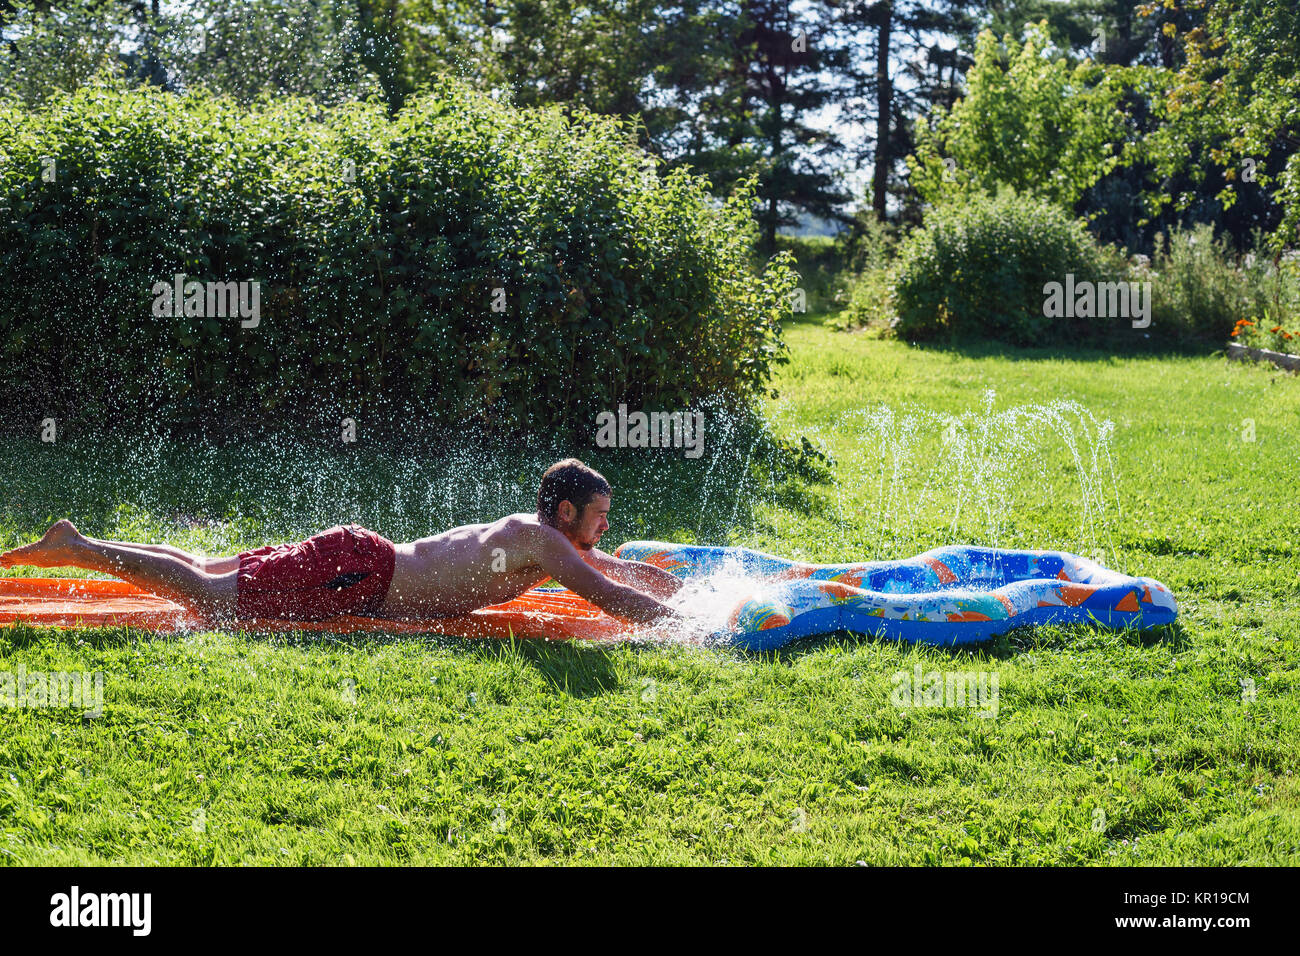 Man playing on a slip and slide in the garden Stock Photo